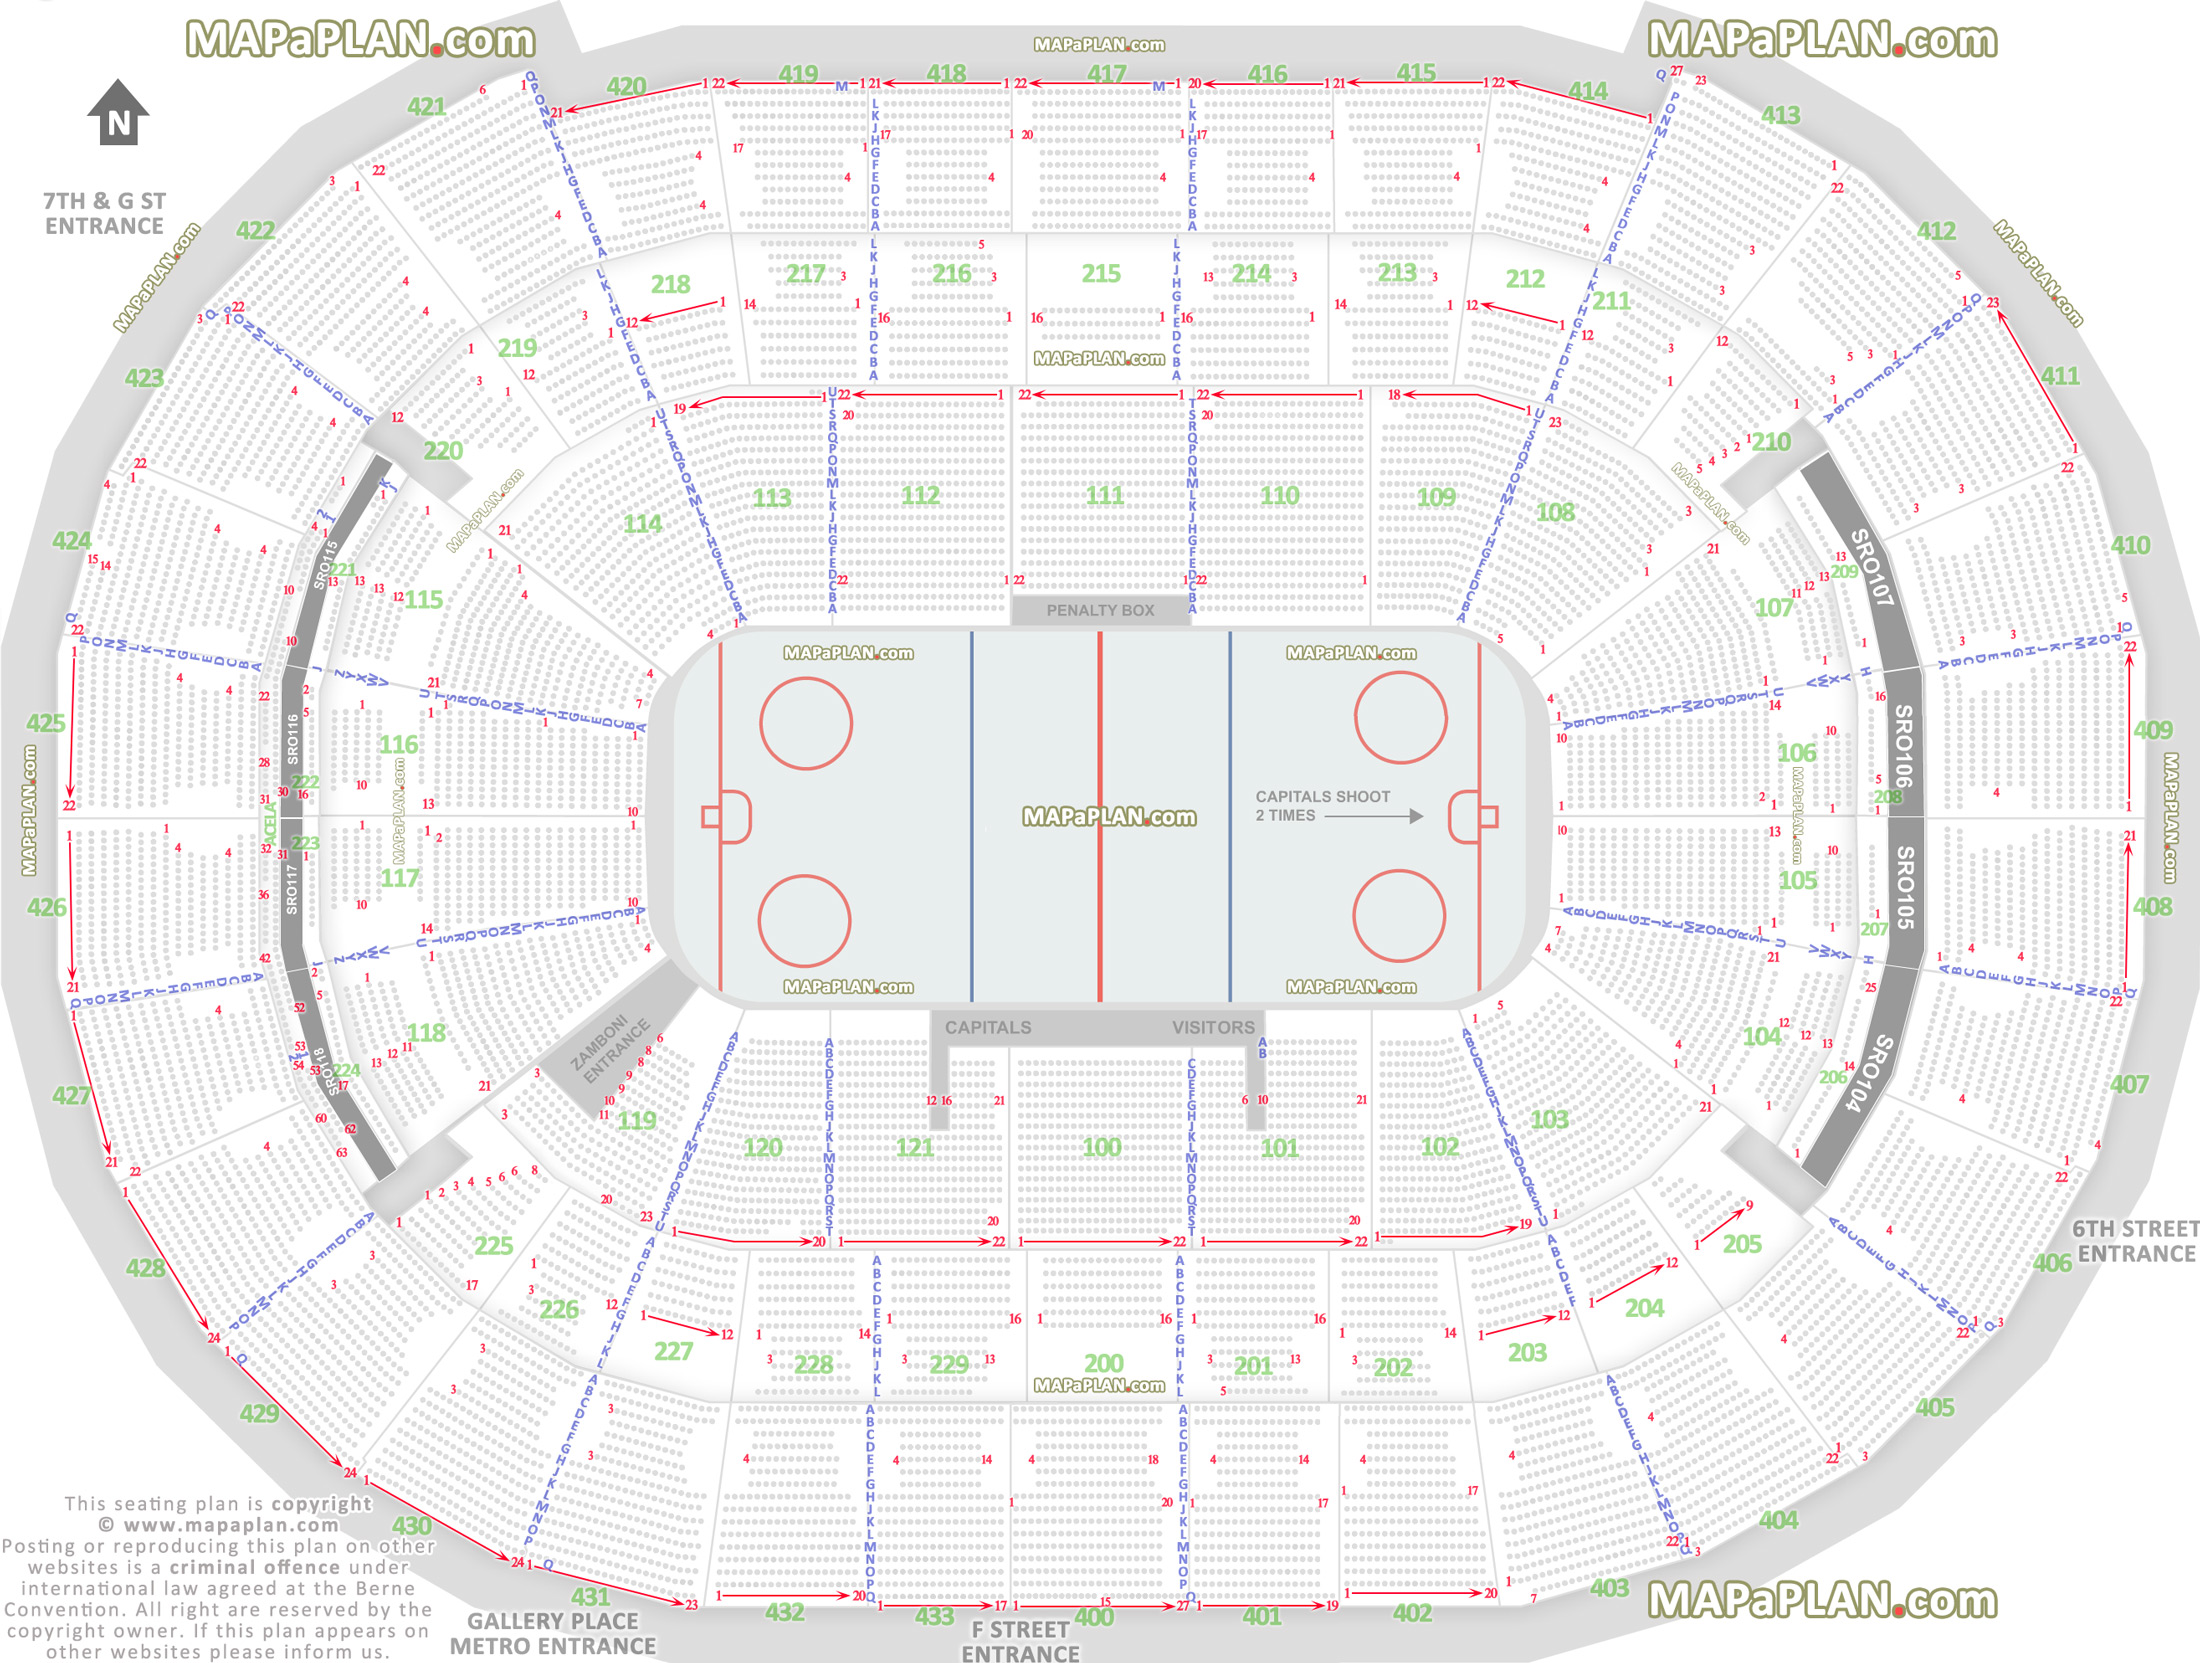 washington capitals nhl hockey game rink diagram best seat finder chart precise aisle numbering location data Washington DC Capital One Arena Center seating chart